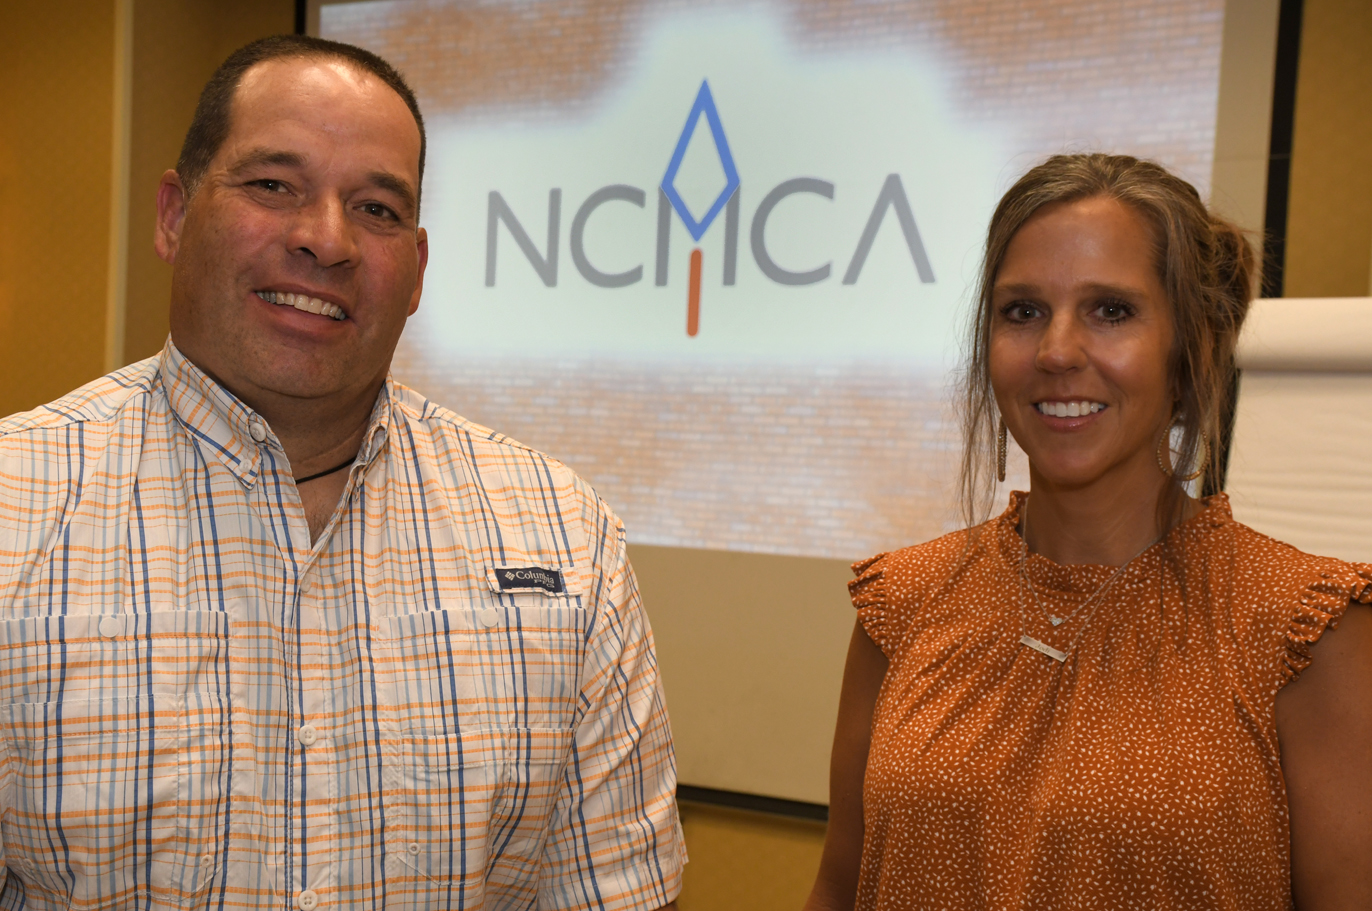 people in front of the NCMCA logo